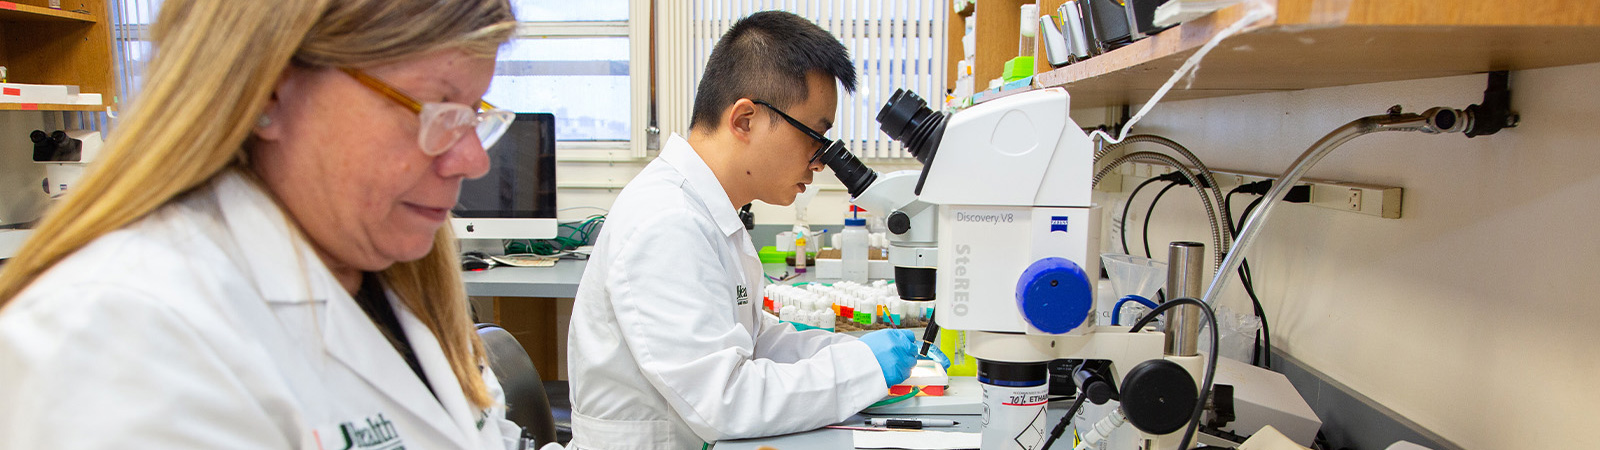 U Health's Xianzum Tao ( right) and Zoraido Diaz- Perez, Research Lab Specialist, work on genotyping fruit flies in Dr.  Grace Zhai's Fruit fly Lab in the Rosenstiel Medical Science Building.  